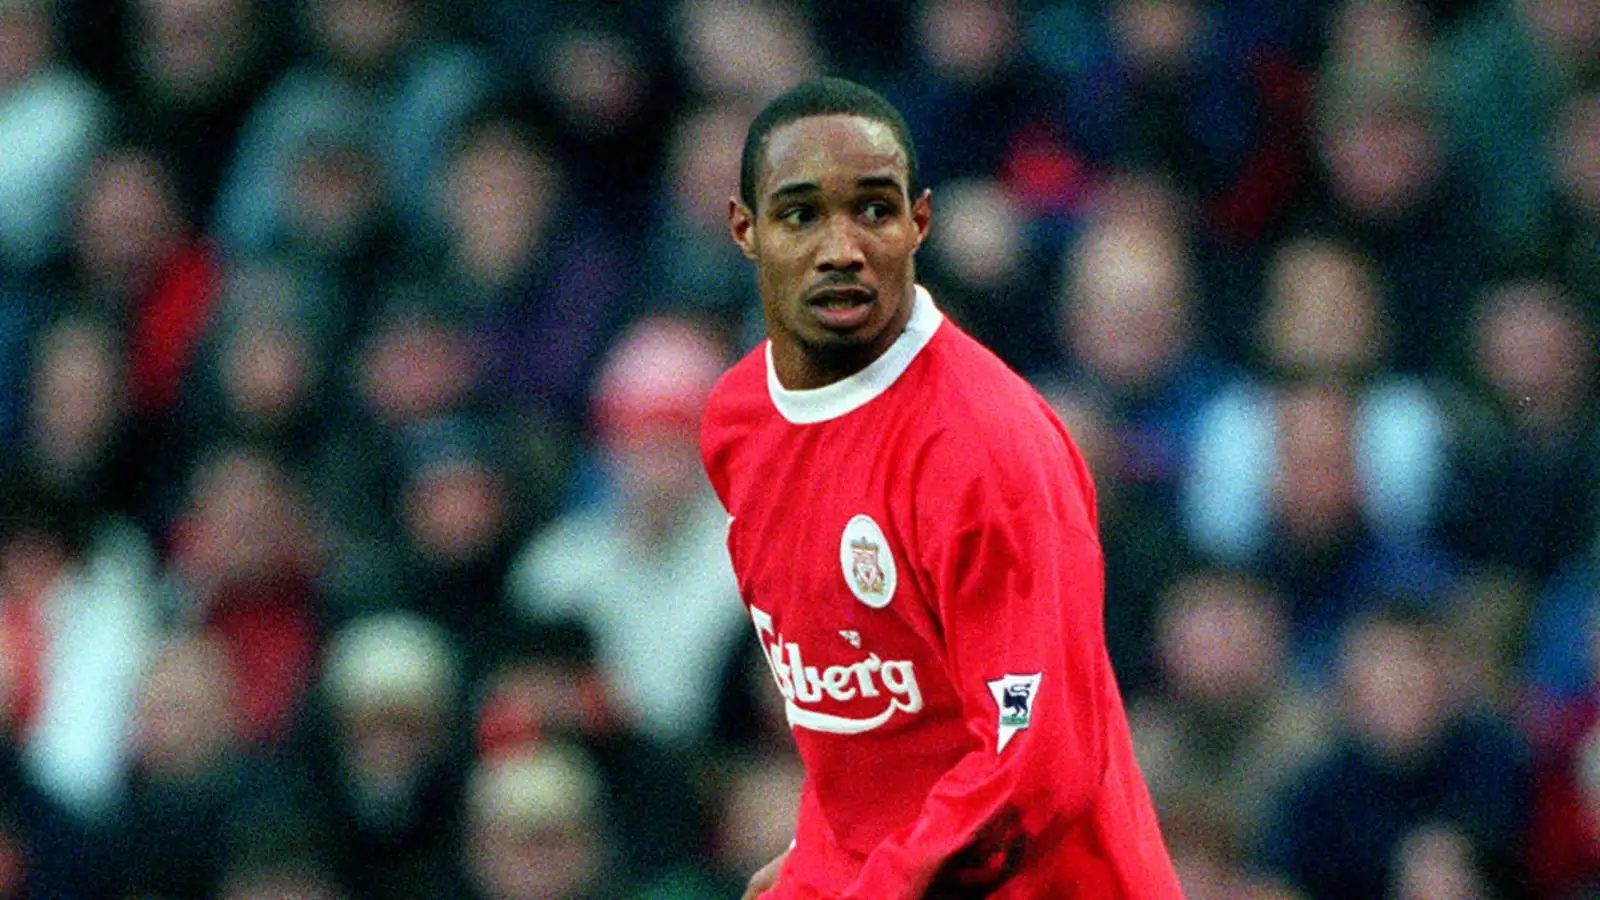 Previous Liverpool midfielder Paul Ince